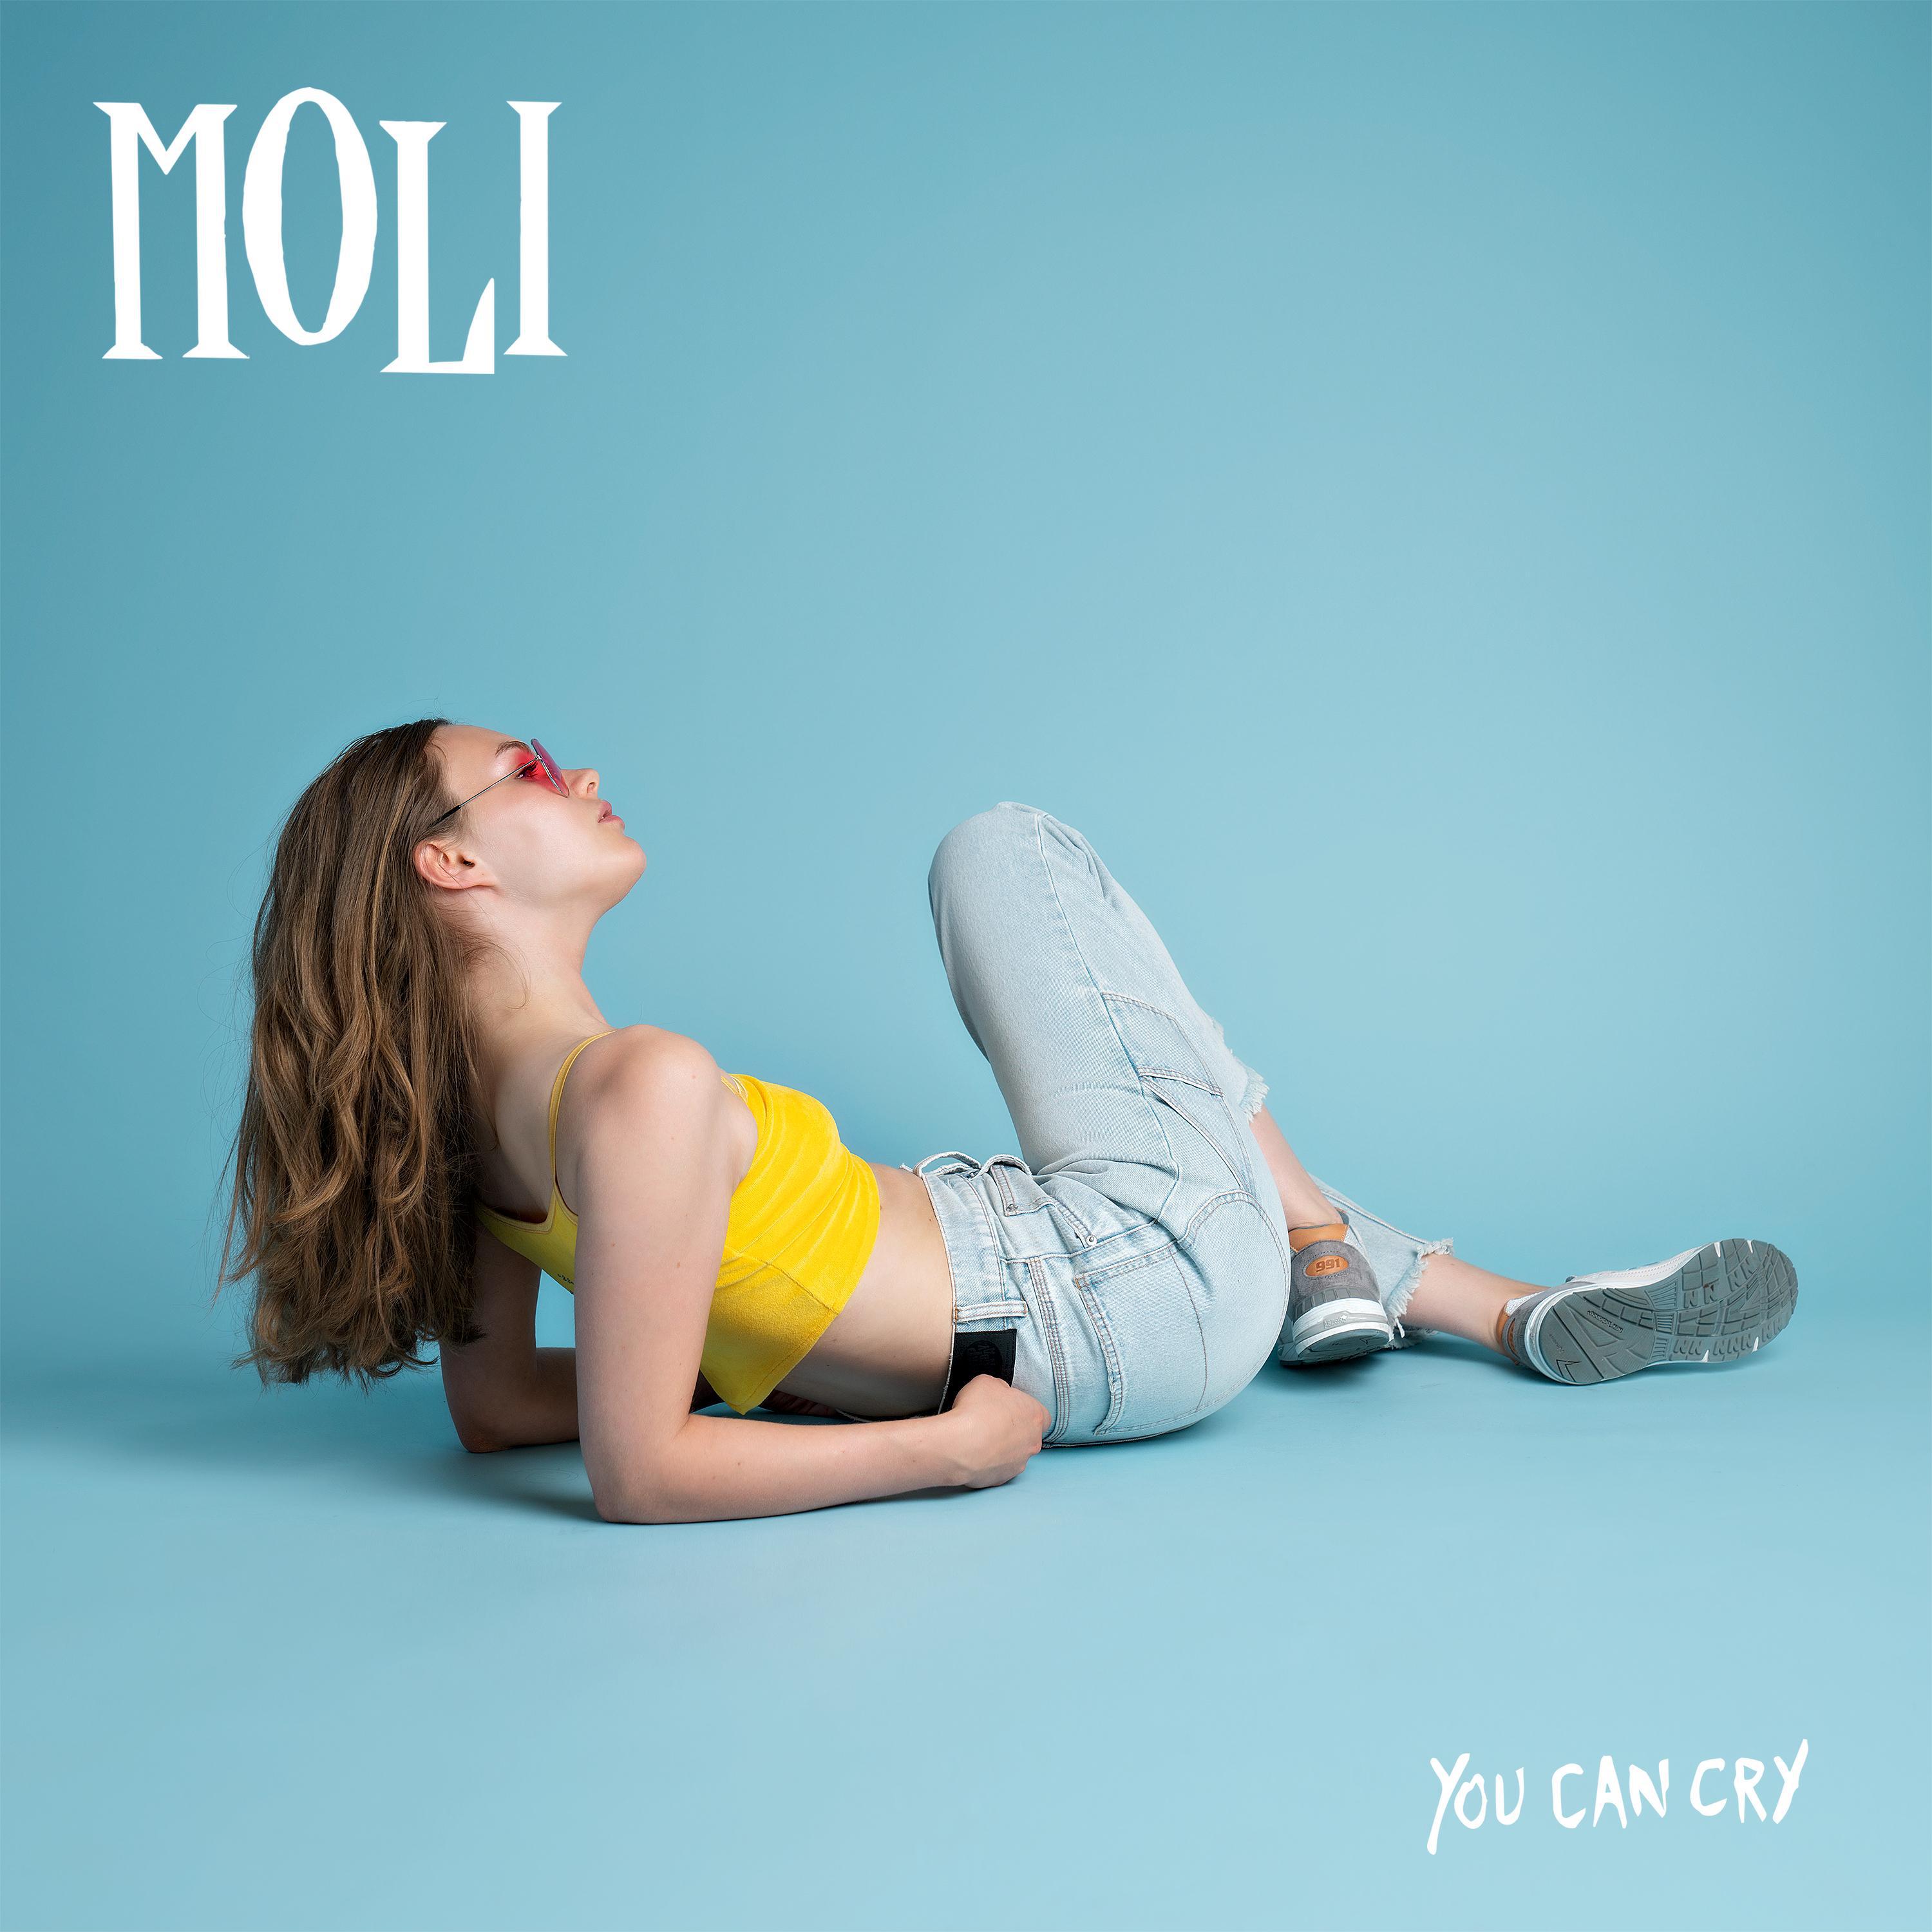 Moli - You Can Cry